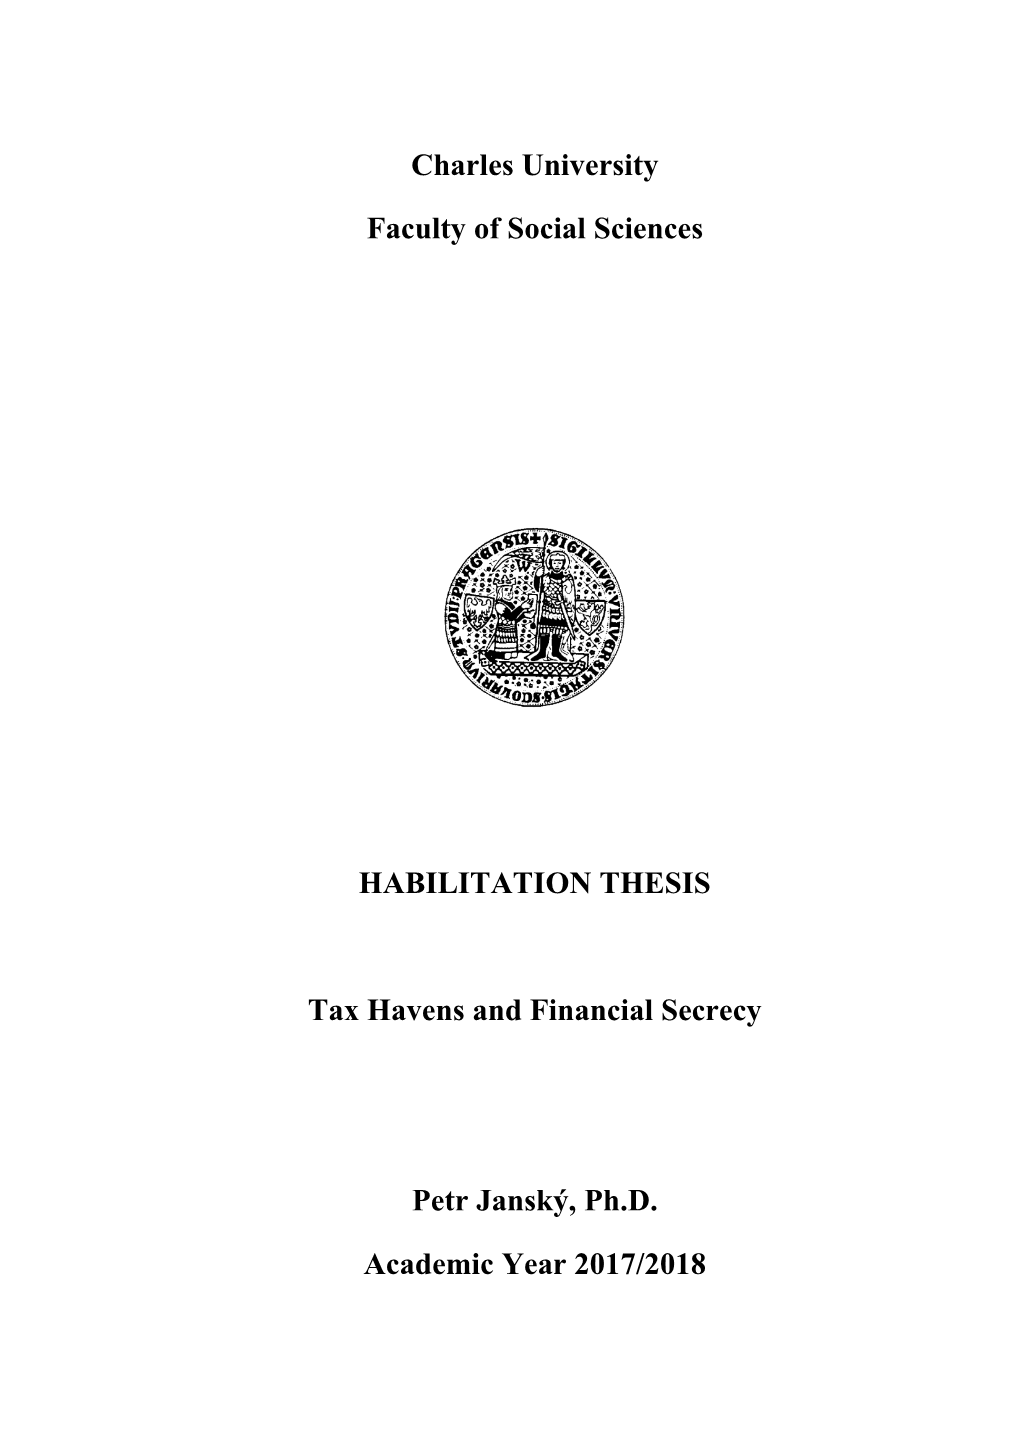 Charles University Faculty of Social Sciences HABILITATION THESIS